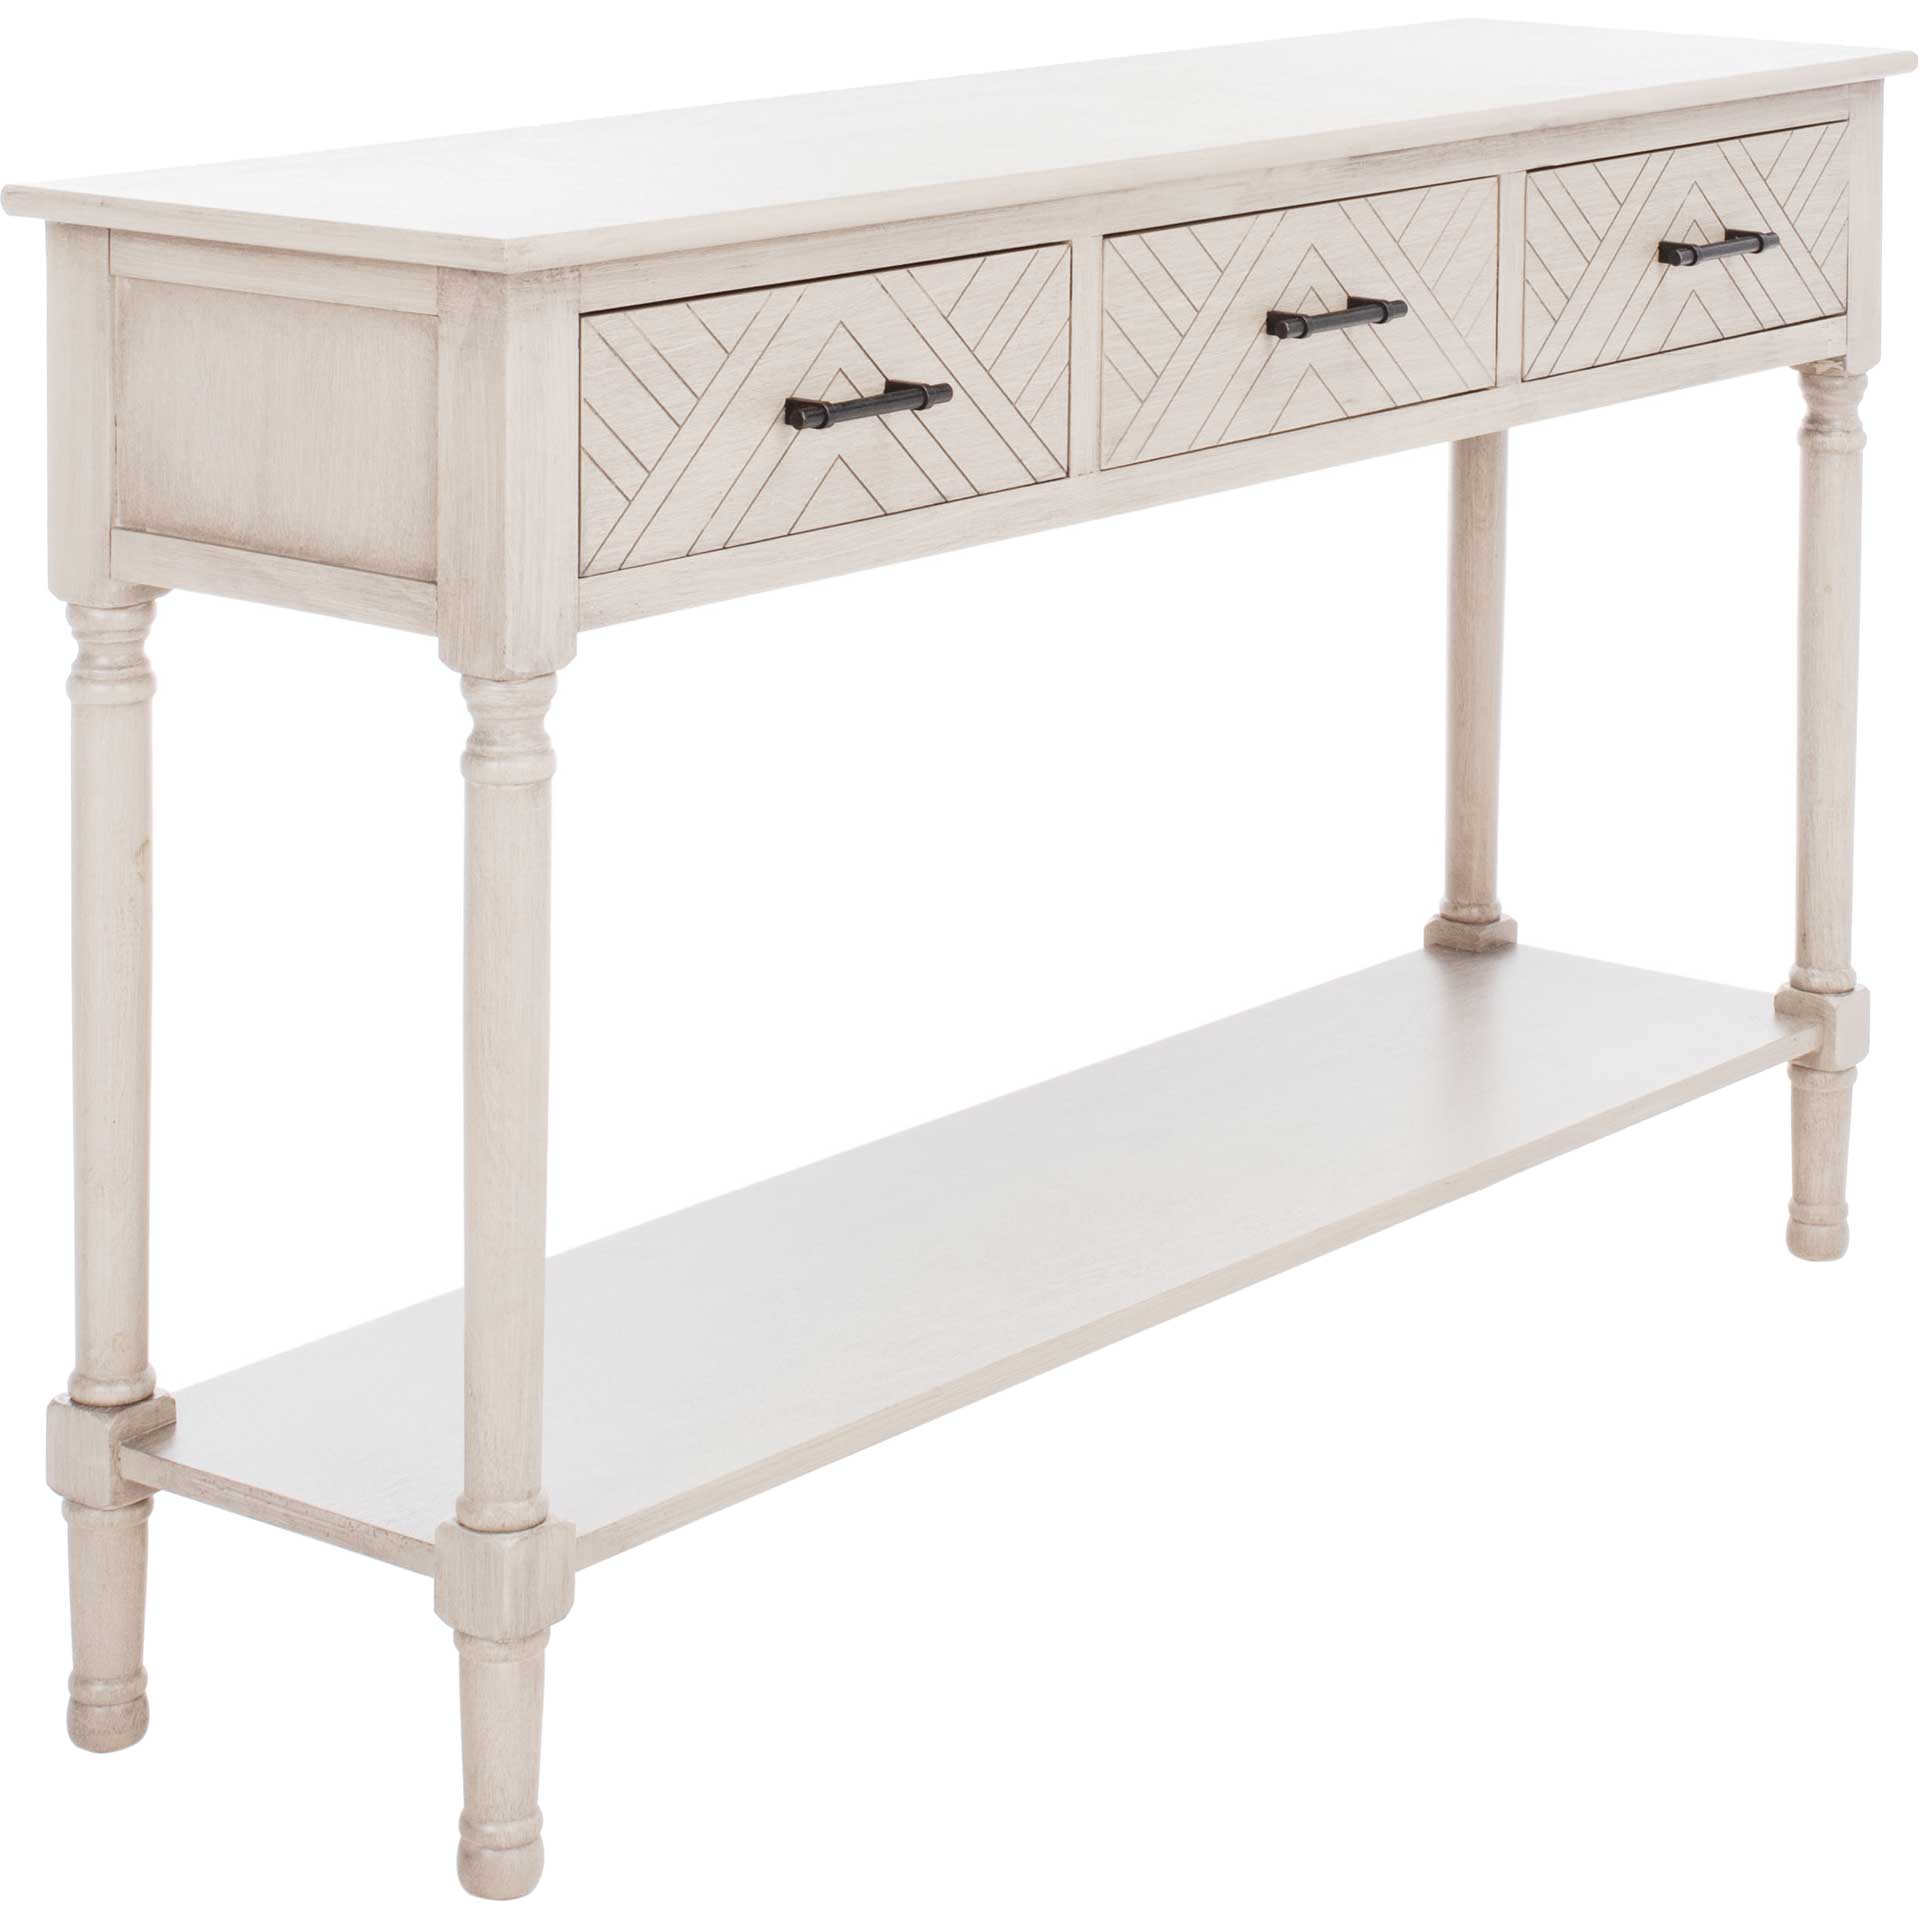 Pebbles 3 Drawer Console Table Greige